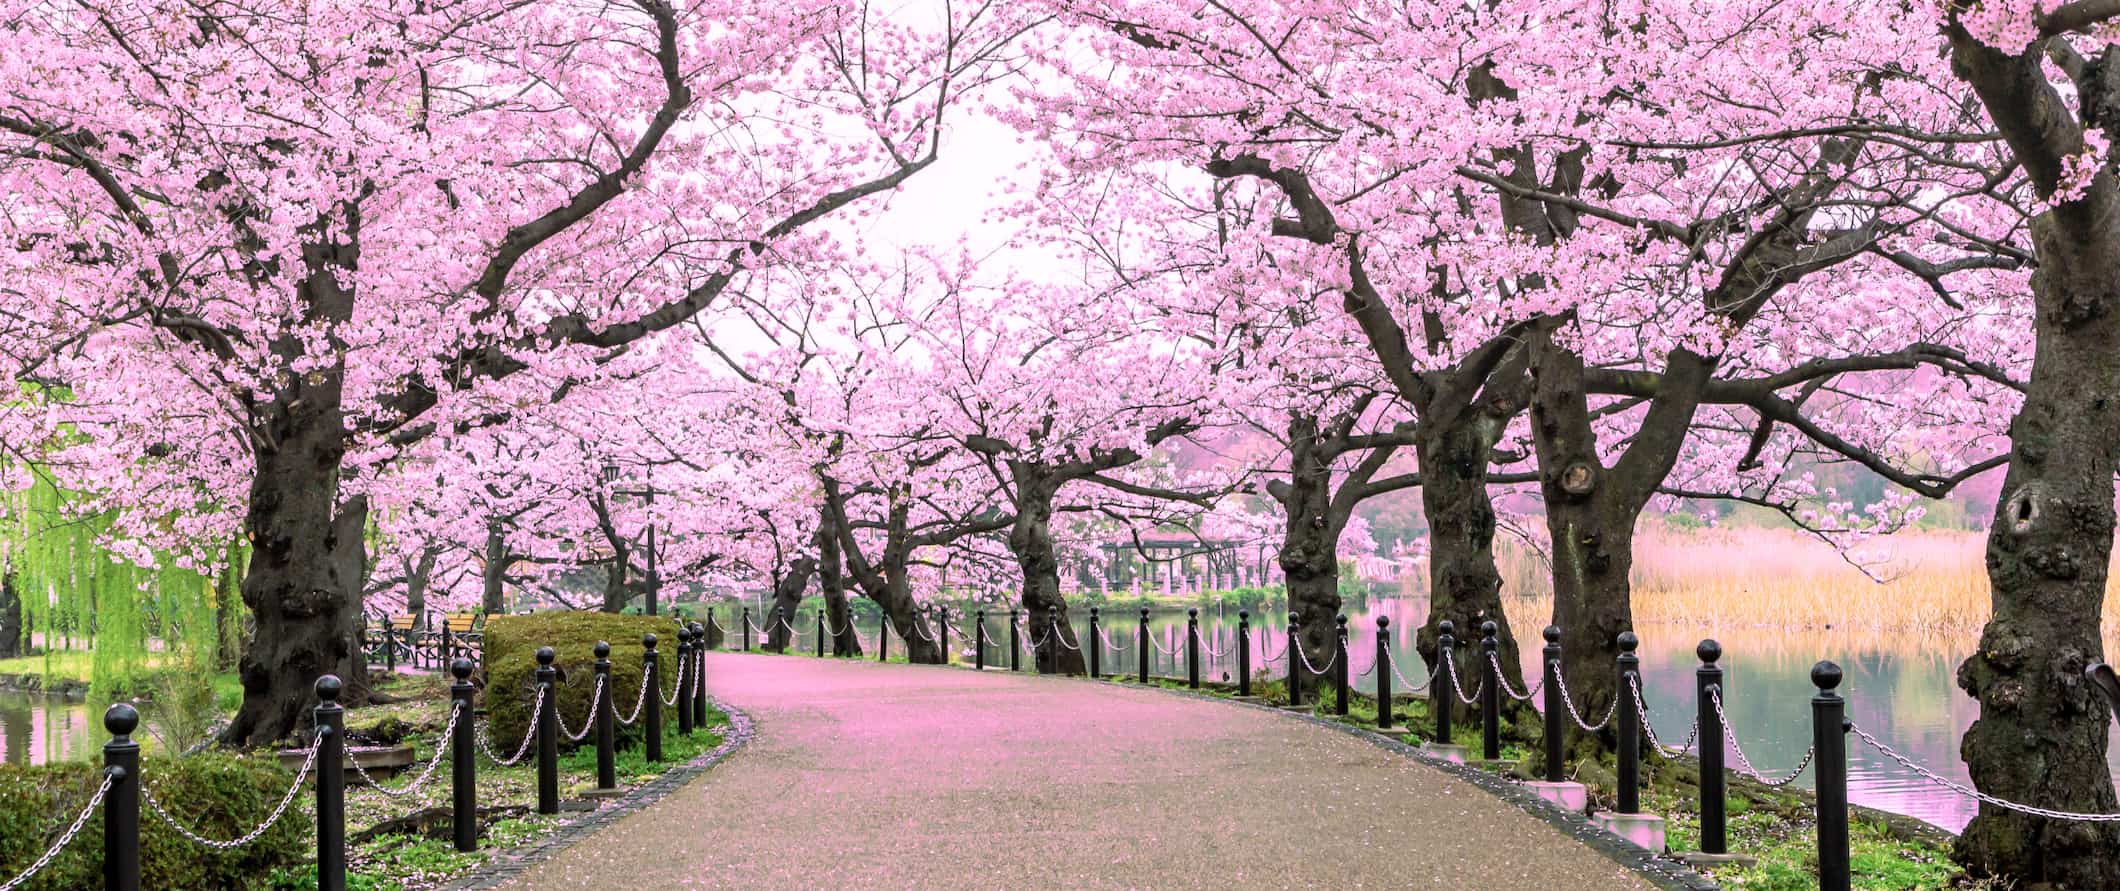 A narrow walkway lined by blooming cherry blossoms near the river in Tokyo, Japan